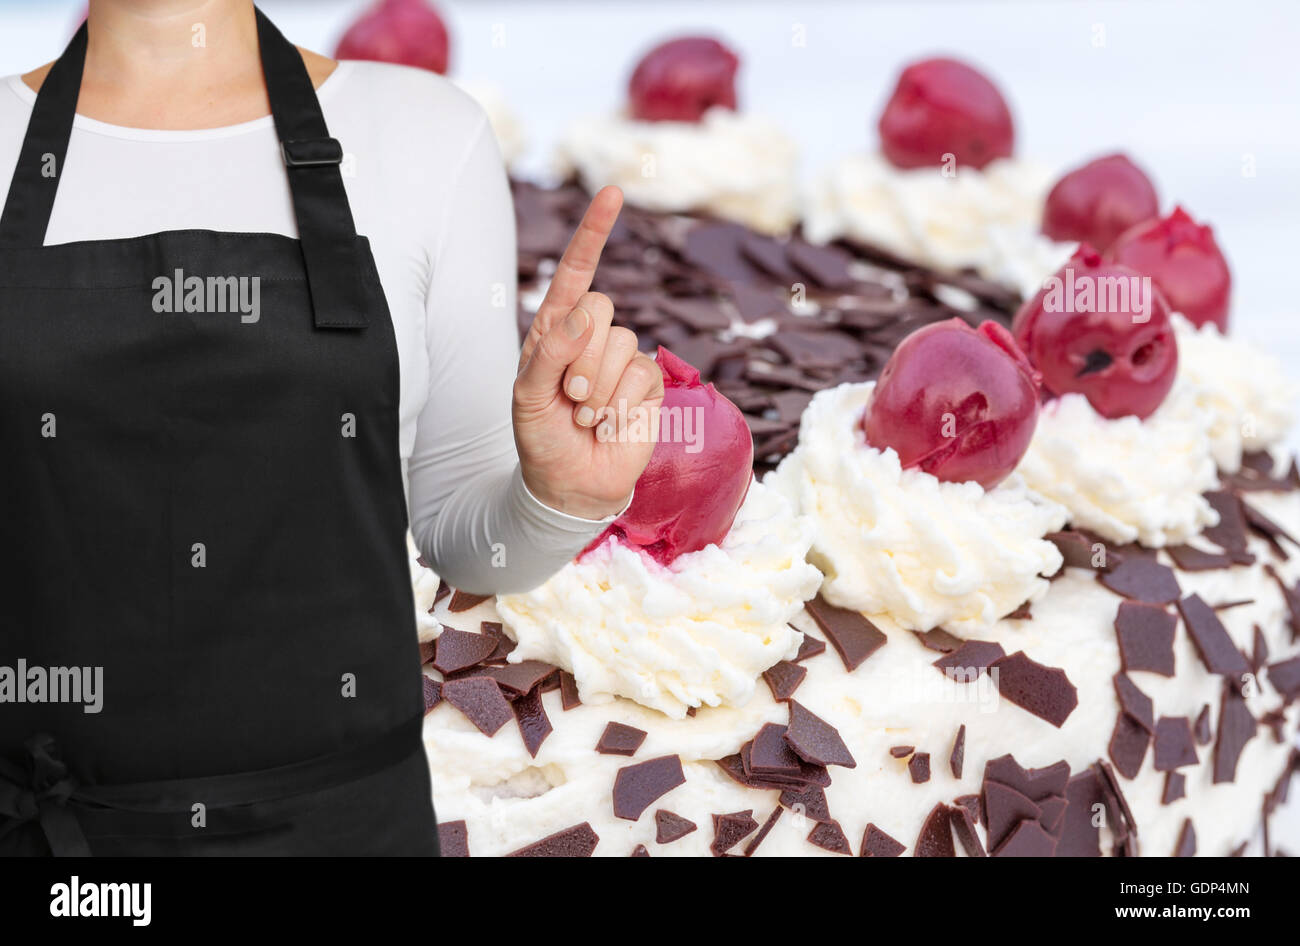 Confectioner with cake background concept template. Stock Photo